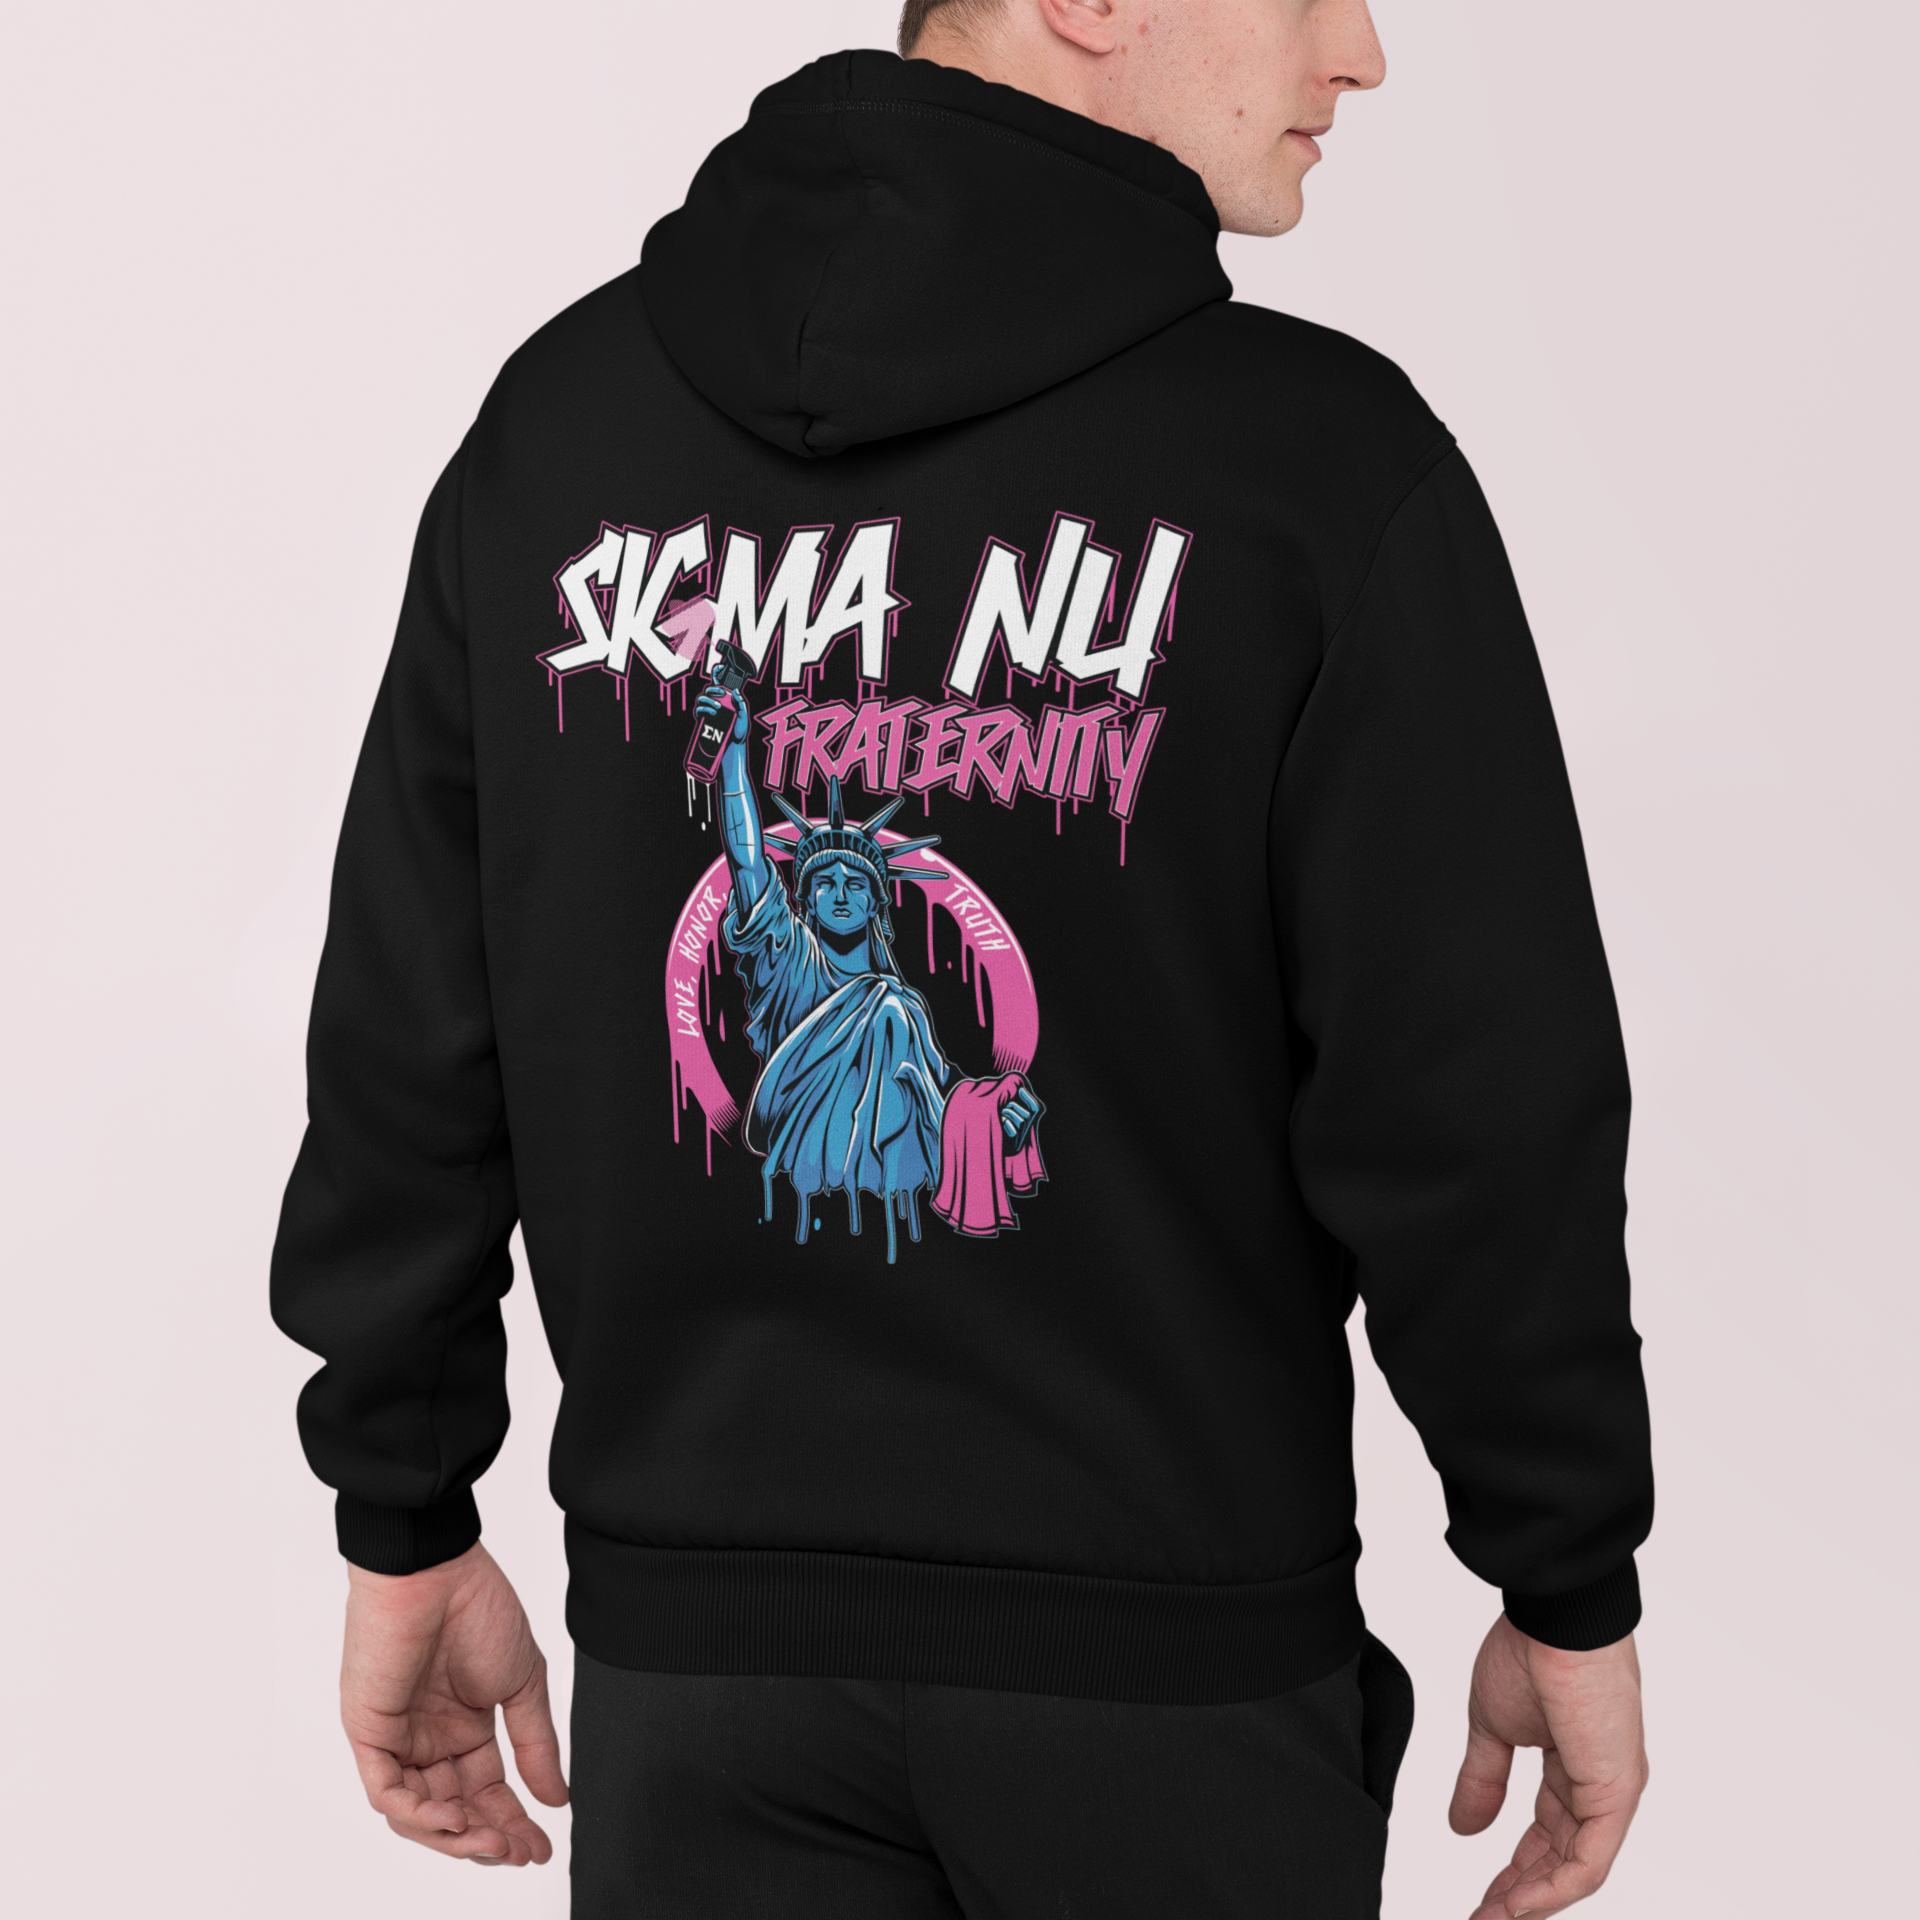 Sigma Nu Graphic Hoodie | Liberty Rebel | Sigma Nu Clothing, Apparel and Merchandise back model